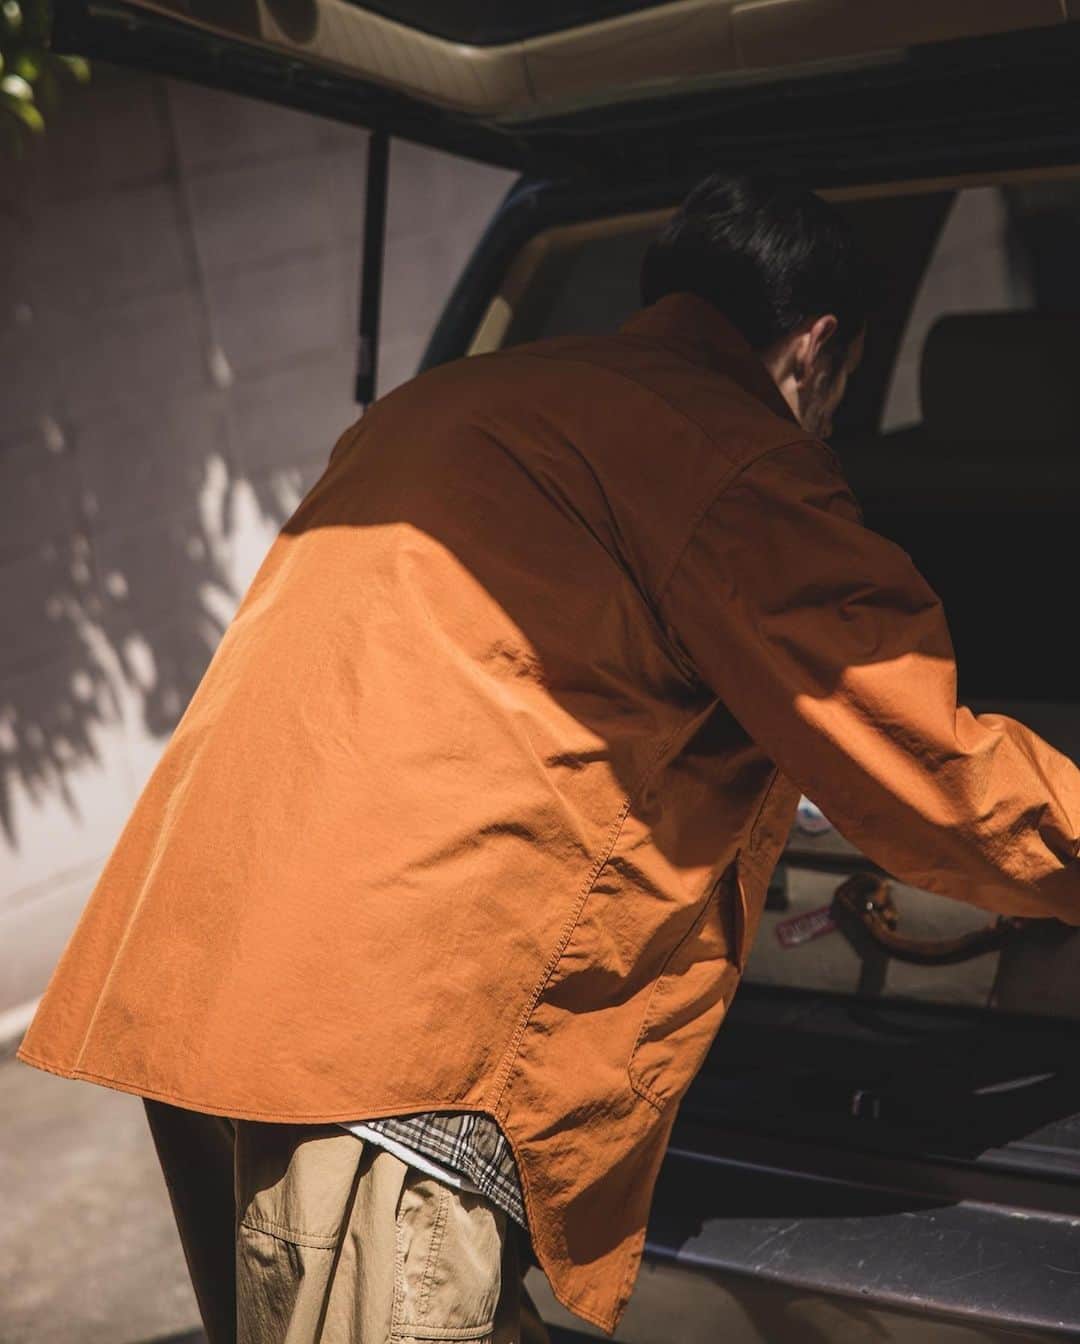 BEAMS+さんのインスタグラム写真 - (BEAMS+Instagram)「... The BEAMS PLUS "Adventure Shirt" is inspired by Vintage outdoor wear. ---------- ●Adventure Shirt Nylon Ripstop Stretch Full of pocket details such as a double yoke design from the shoulder to the chest on the front and pockets that also serve as glass holders. Ripstop nylon with a lightweight texture and a touch that feels like a natural material. It also stretches wel, you never feel any stress. The crispness and firmness are also its attractive features of this fabric.  ●Adventure Shirt Ⅲ Hybrid Polyester Check The "Adventure Shirt III" is a pullover style based on outdoor wear from the 1950s. The design of this product is very engaging with four flap pockets on the front and various pockets on the sides. The cuffs are finished with outer-like snap buttons. Based on the idea of making the "Indian Madras" material tougher look and feel, this material is developed with a yarn-dyed check material woven with polyester yarns. The lightness and coolness of the Indian Madras fabric is maintained, while the material is updated to be more practical.  シャツとは思えないほど、細部にこだわったポケットデザインが魅力的。Vintageのアウトドアウエアからインスピレーションした、BEAMS PLUSの『アドベンチャーシャツ』 ---------- ●Adventure Shirt Nylon Ripstop Stretch 前身頃の肩から胸にかけて2重のヨークを施したデザインや、グラスホルダーを兼ねたポケットなど、ポケットディテール満載。 軽い質感、まるで天然素材のようなタッチ感が特徴のリップストップナイロン。ストレッチの機能もあり、ストレスフリーな着心地を実現。シャリ感とハリコシが魅力的。  ●Adventure Shirt Ⅲ Hybrid Polyester Check 1950年代のアウトドアウエアをベースにプルオーバー型を採用した『Adventure Shirt Ⅲ』。前身頃に4つのフラップポケットや、サイドに多彩なポケットを配置したデザインが魅力的。カフ部分はアウターライクなスナップボタン仕様。 『インディアンマドラスの素材を、もう少しタフな雰囲気で。』そんなイメージで作り込んだこの素材は、ポリエステル糸で織り上げた先染めチェック素材。軽さや清涼感はインディアンマドラスの雰囲気を保ちつつ、より実用的な素材へとアップデートしています。 . @beams_plus  @beams_plus_harajuku @beams_plus_yurakucho  #beamsplus」5月11日 20時00分 - beams_plus_harajuku